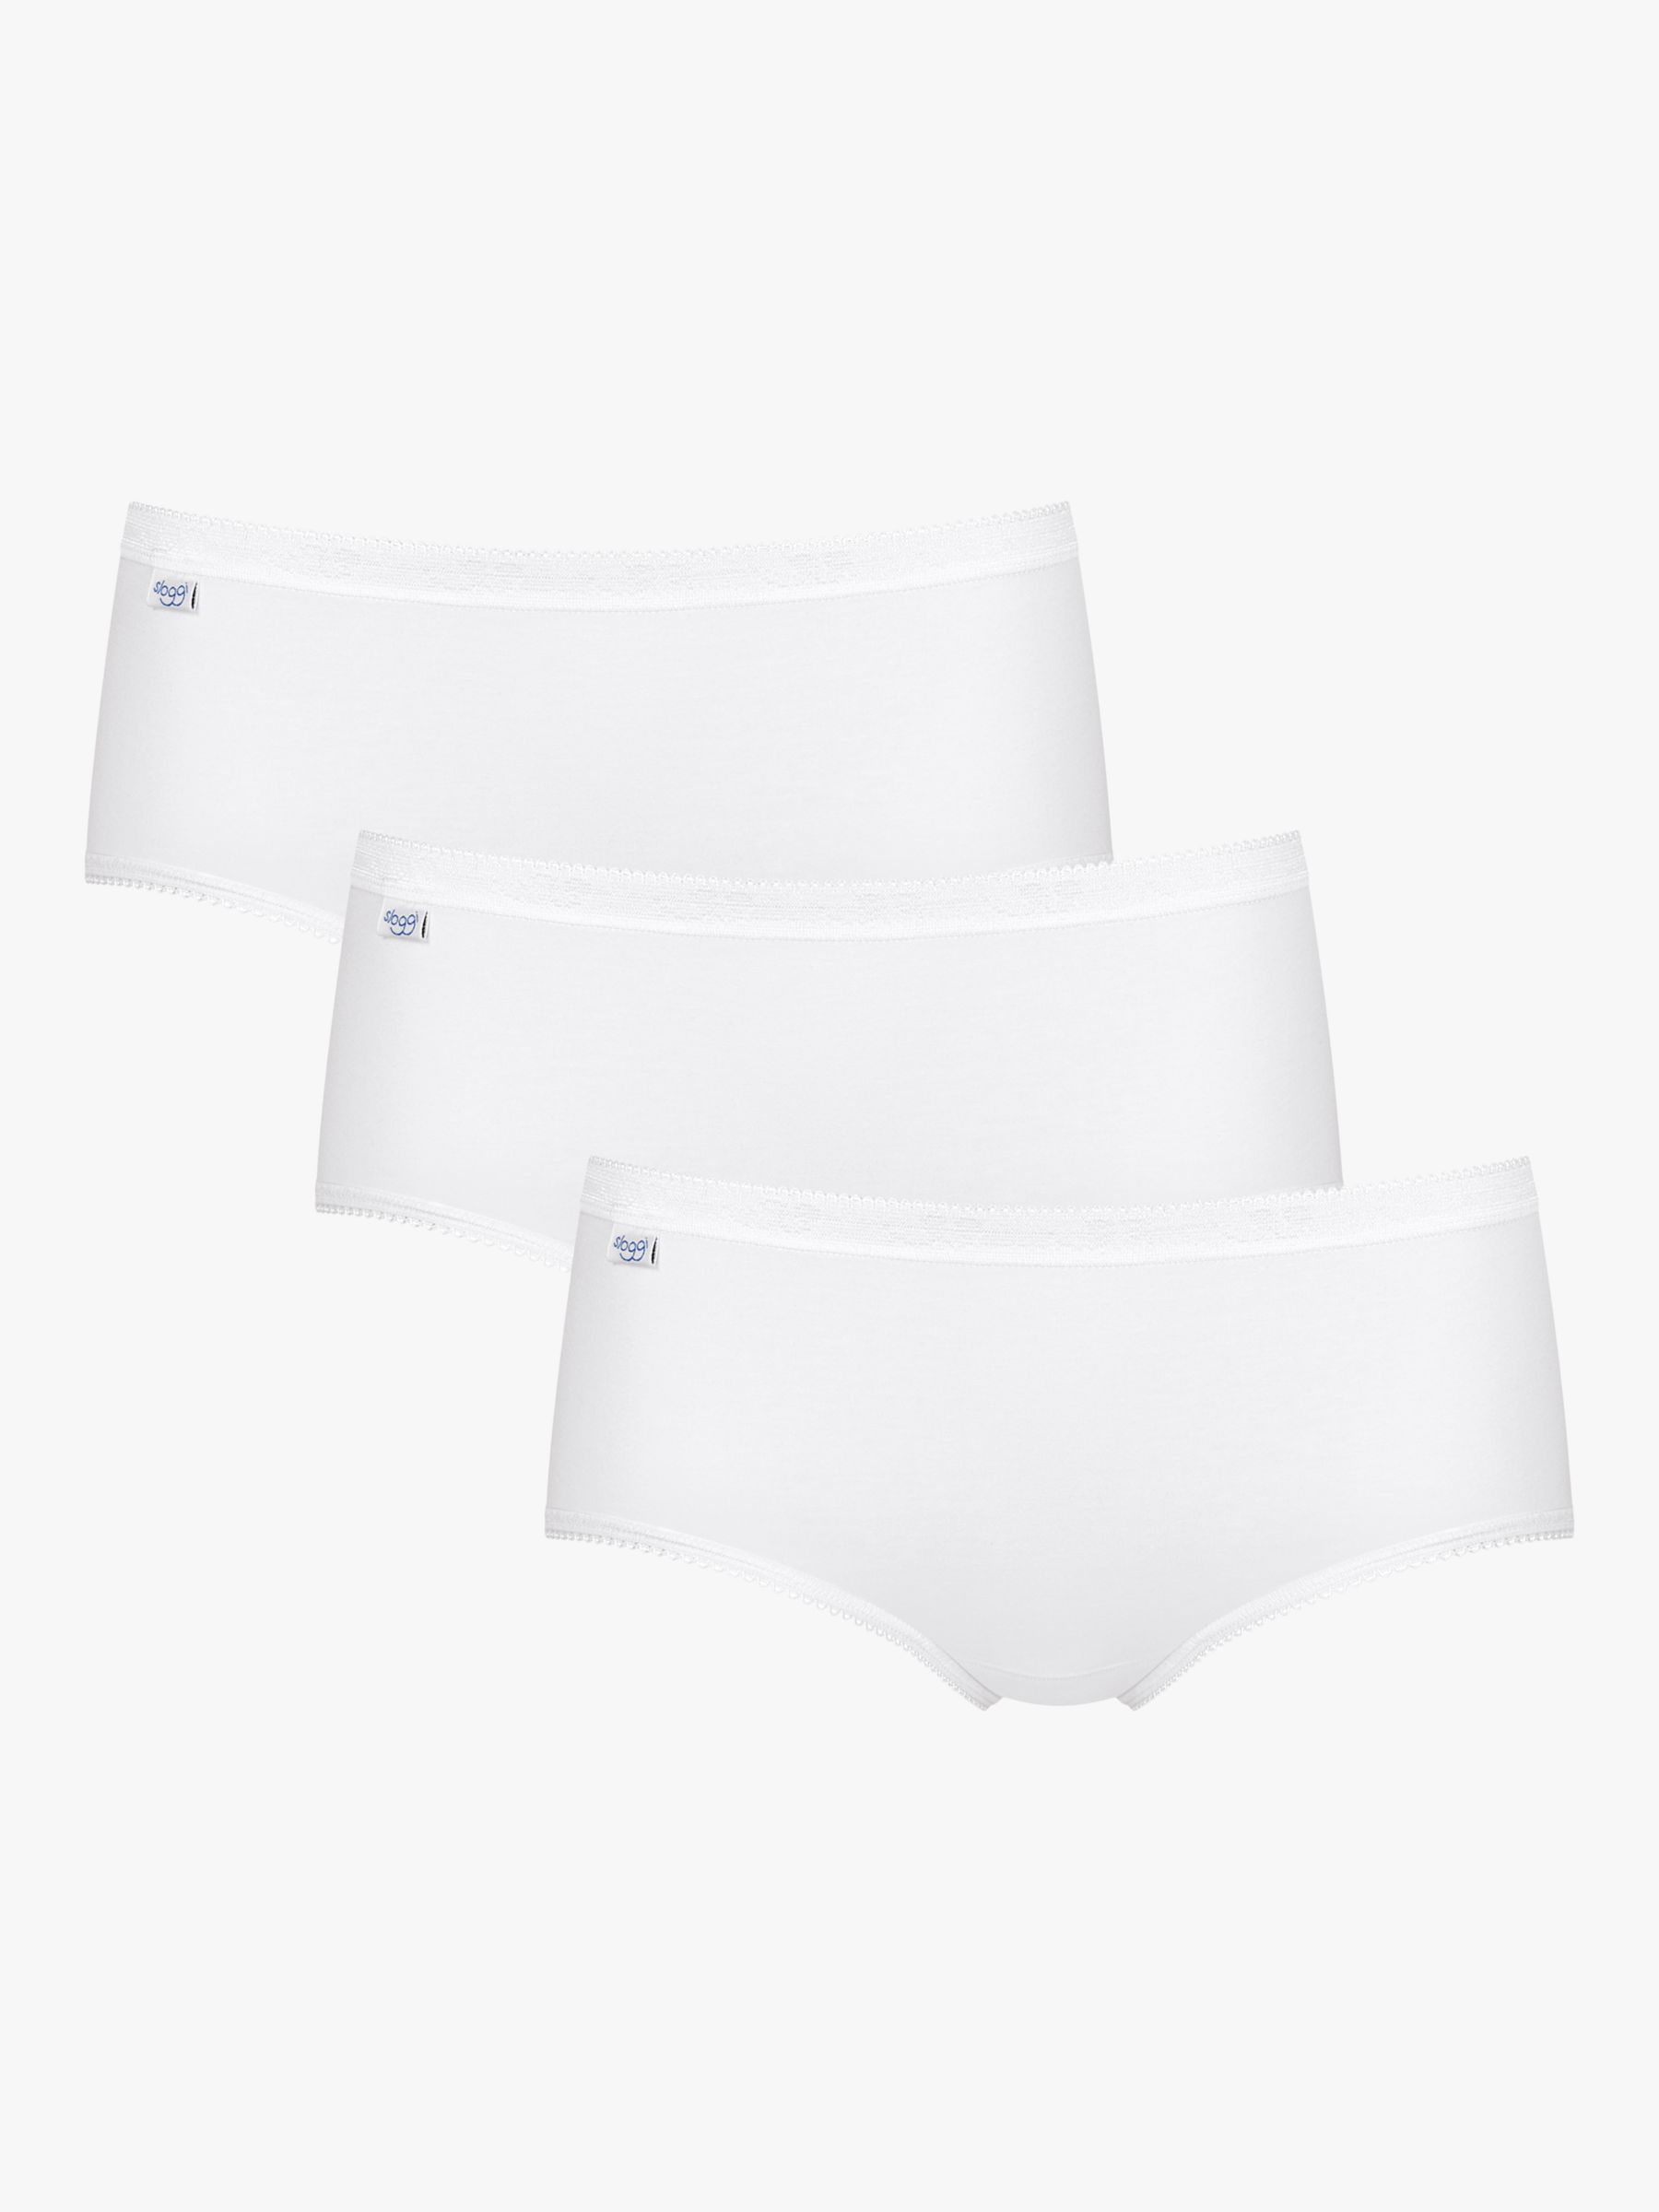 Cantaloop Caesarean Section Briefs, Pack of 2, White/Black